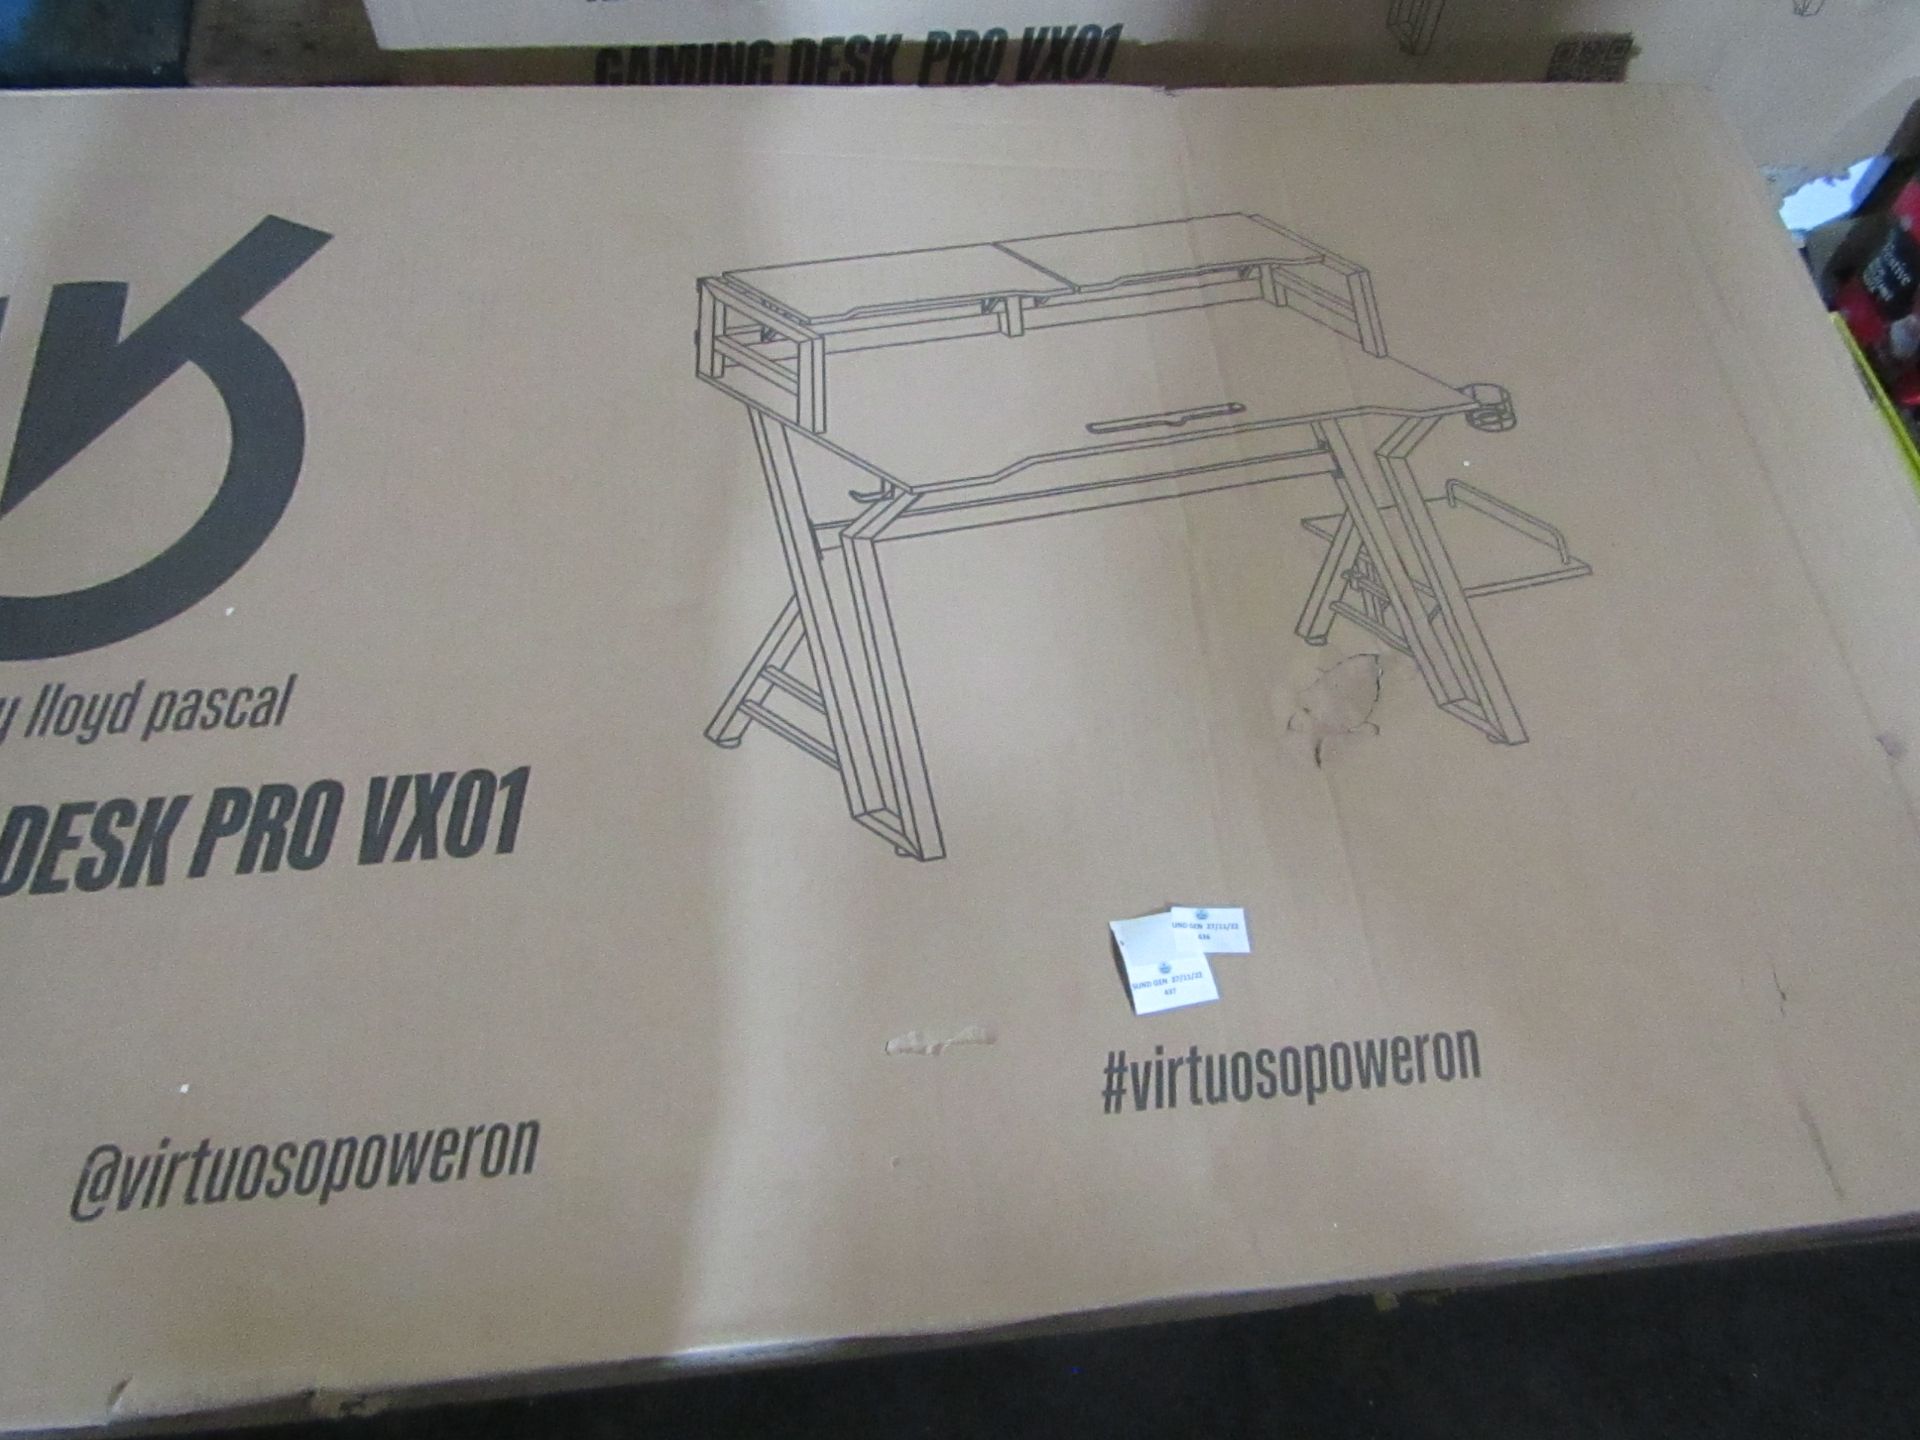 Virtuoso By Lloyd Pascal - Gaming Desk Pro VX01 - Black & Red - Unchecked & Boxed.